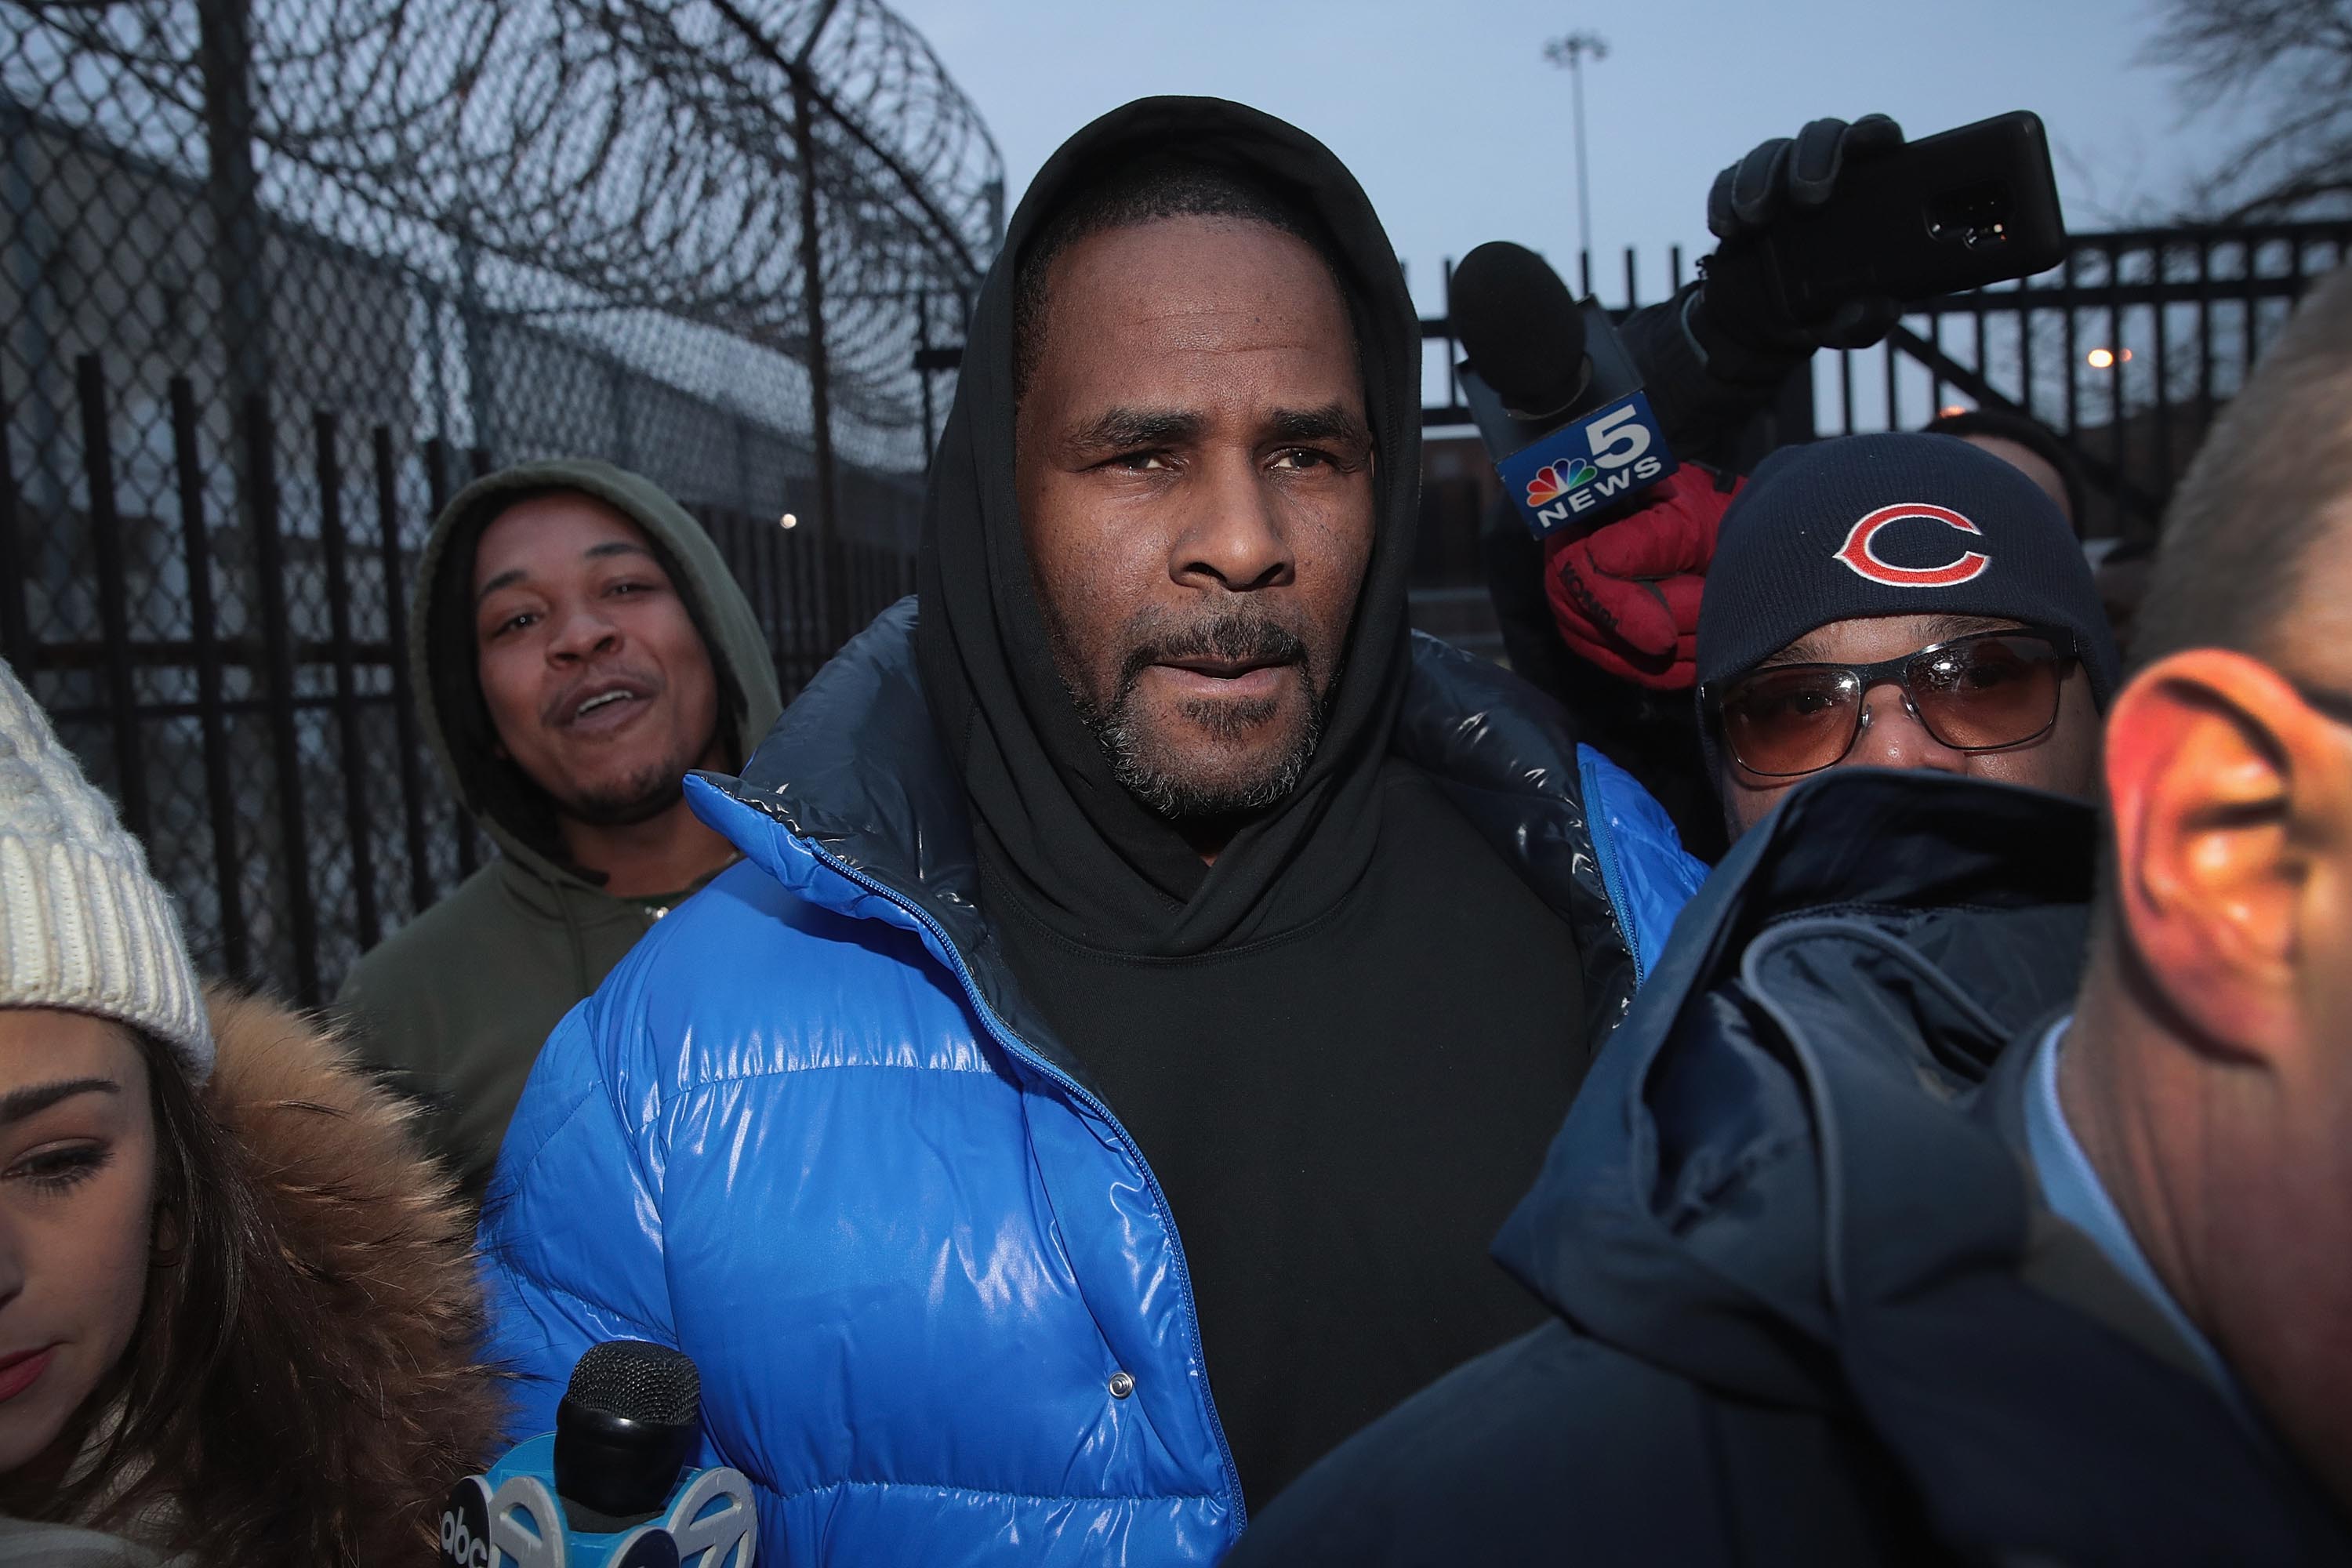 R. Kelly leaves the Cook County jail after posting bail on Feb. 25, 2019 in Chicago | Photo: Getty Images